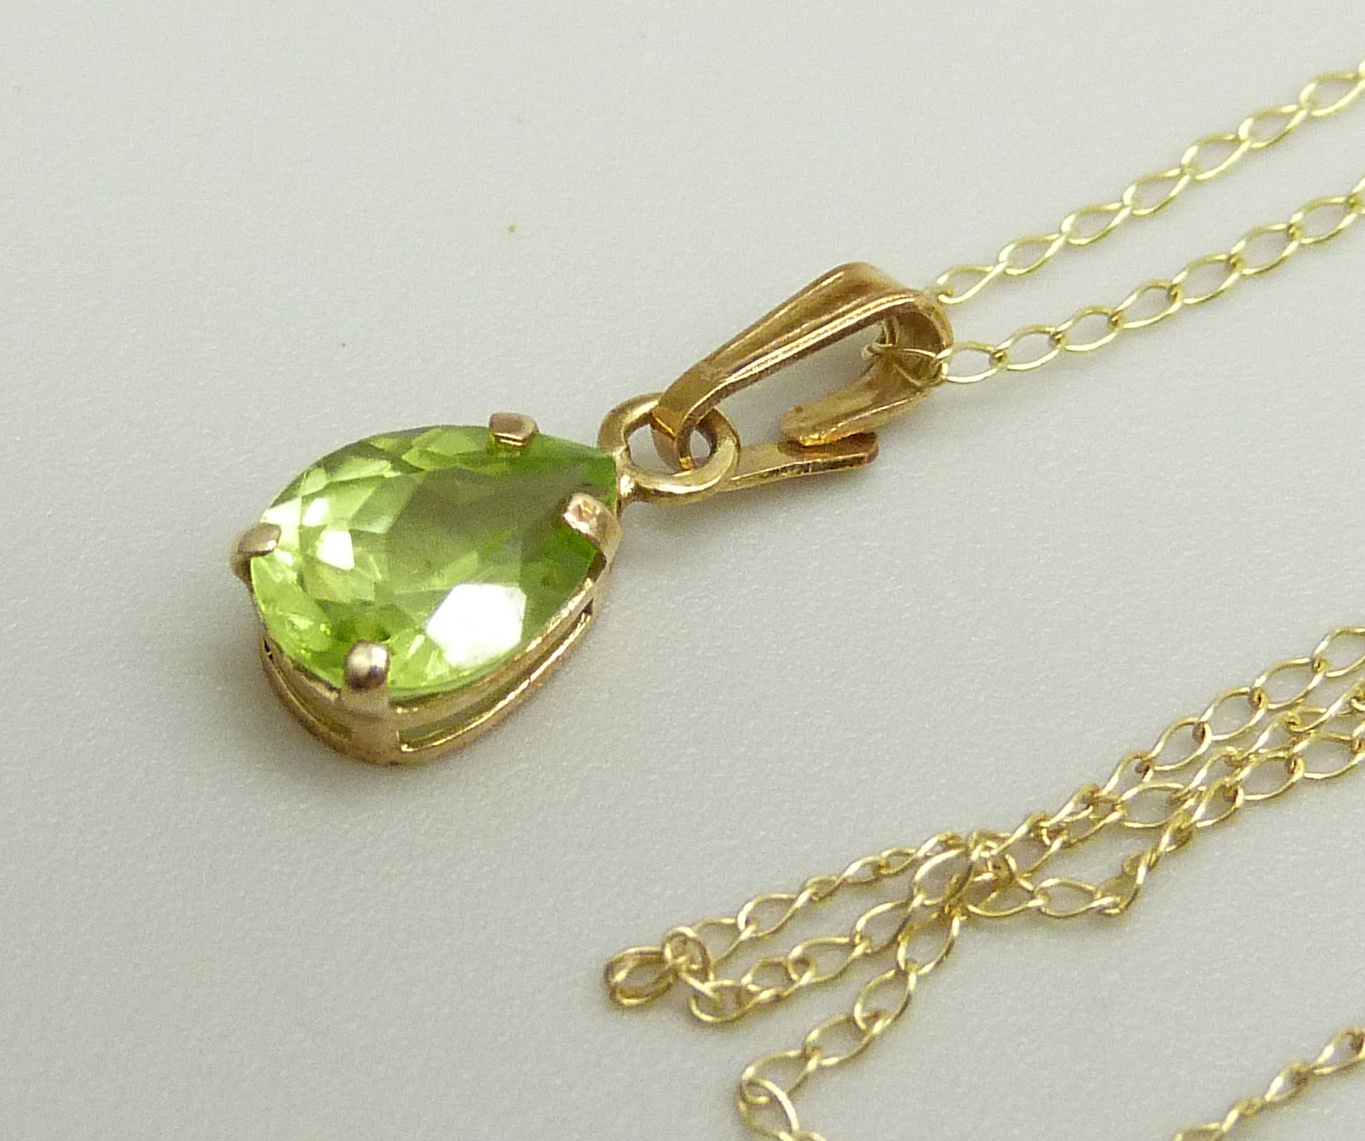 A 10k gold and peridot pendant on a fine 10k gold chain, 0.8g, chain approximately 46cm, pendant 1. - Image 2 of 3